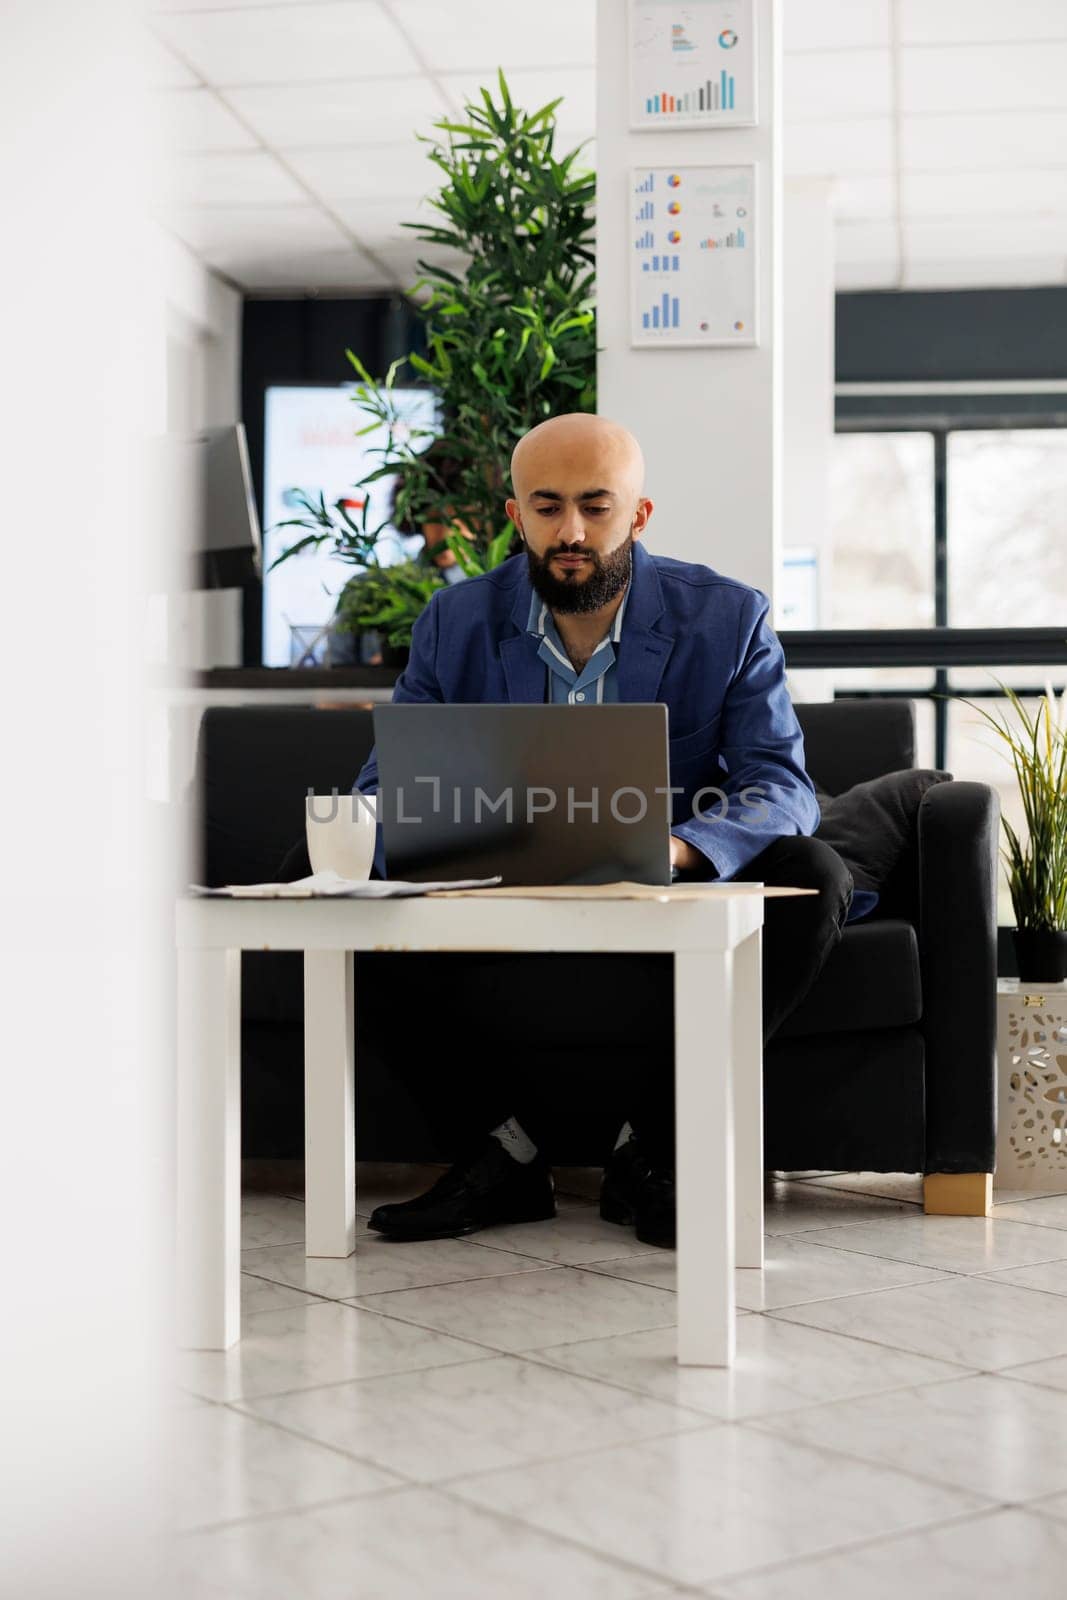 Arab man startup business employee typing on laptop, analyzing marketing campaign. Company executive manager planning product sales strategy while working in coworking open space